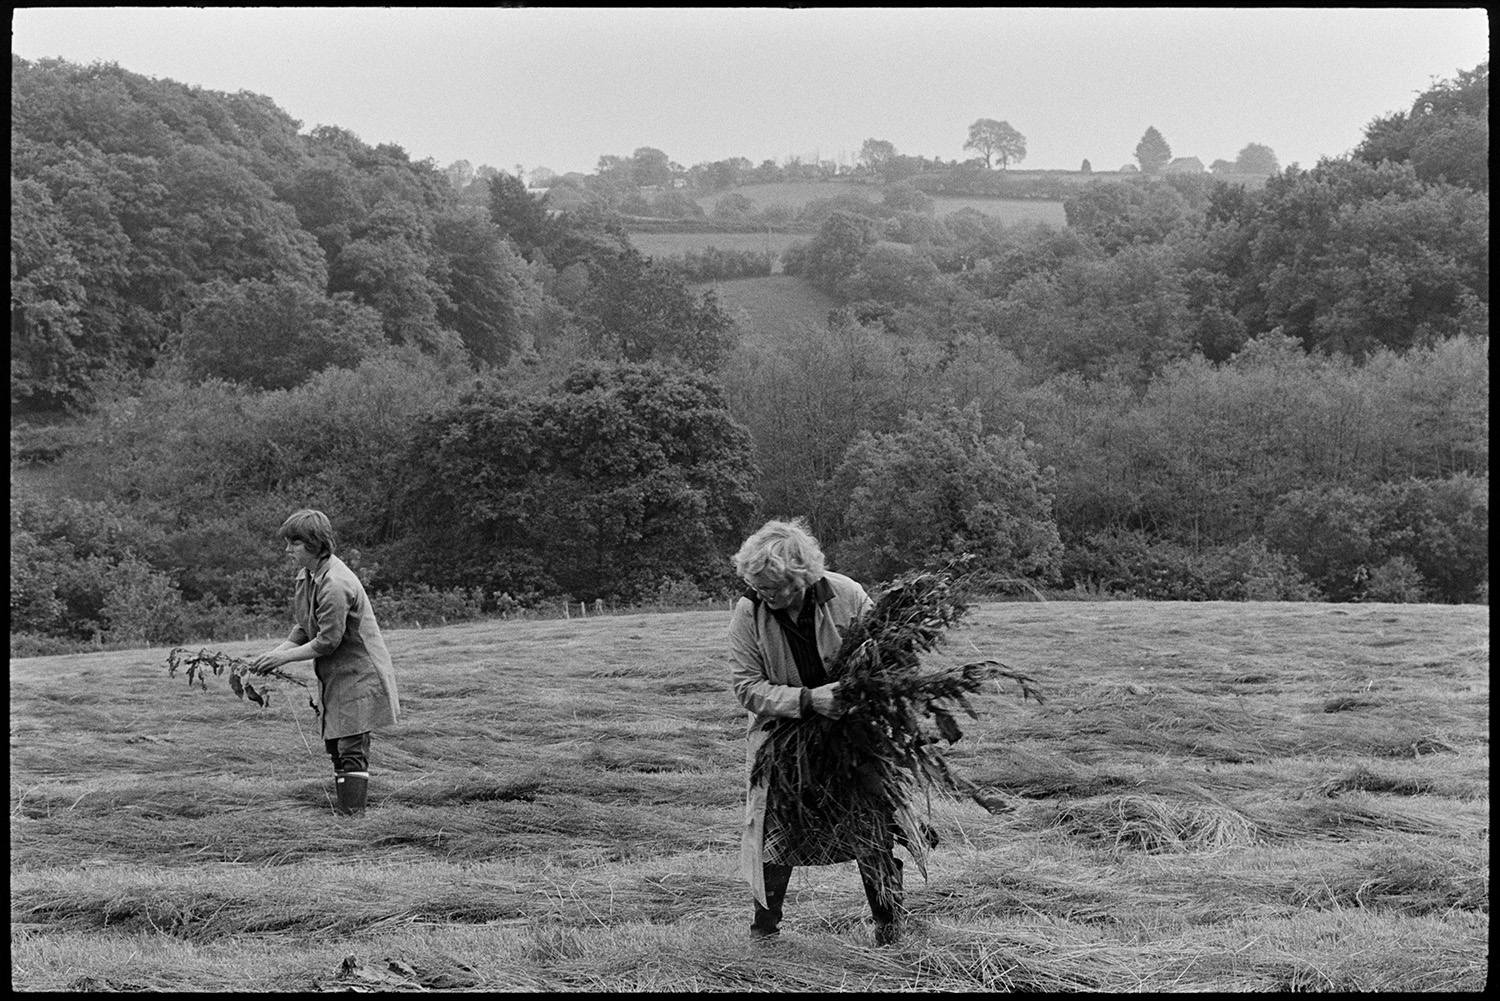 Women picking up thistles from hayfield.
[May Pugsley and another person picking up thistles by hand from cut hay, in a field at Lower Langham, Dolton A wooded area can be seen in the background.]